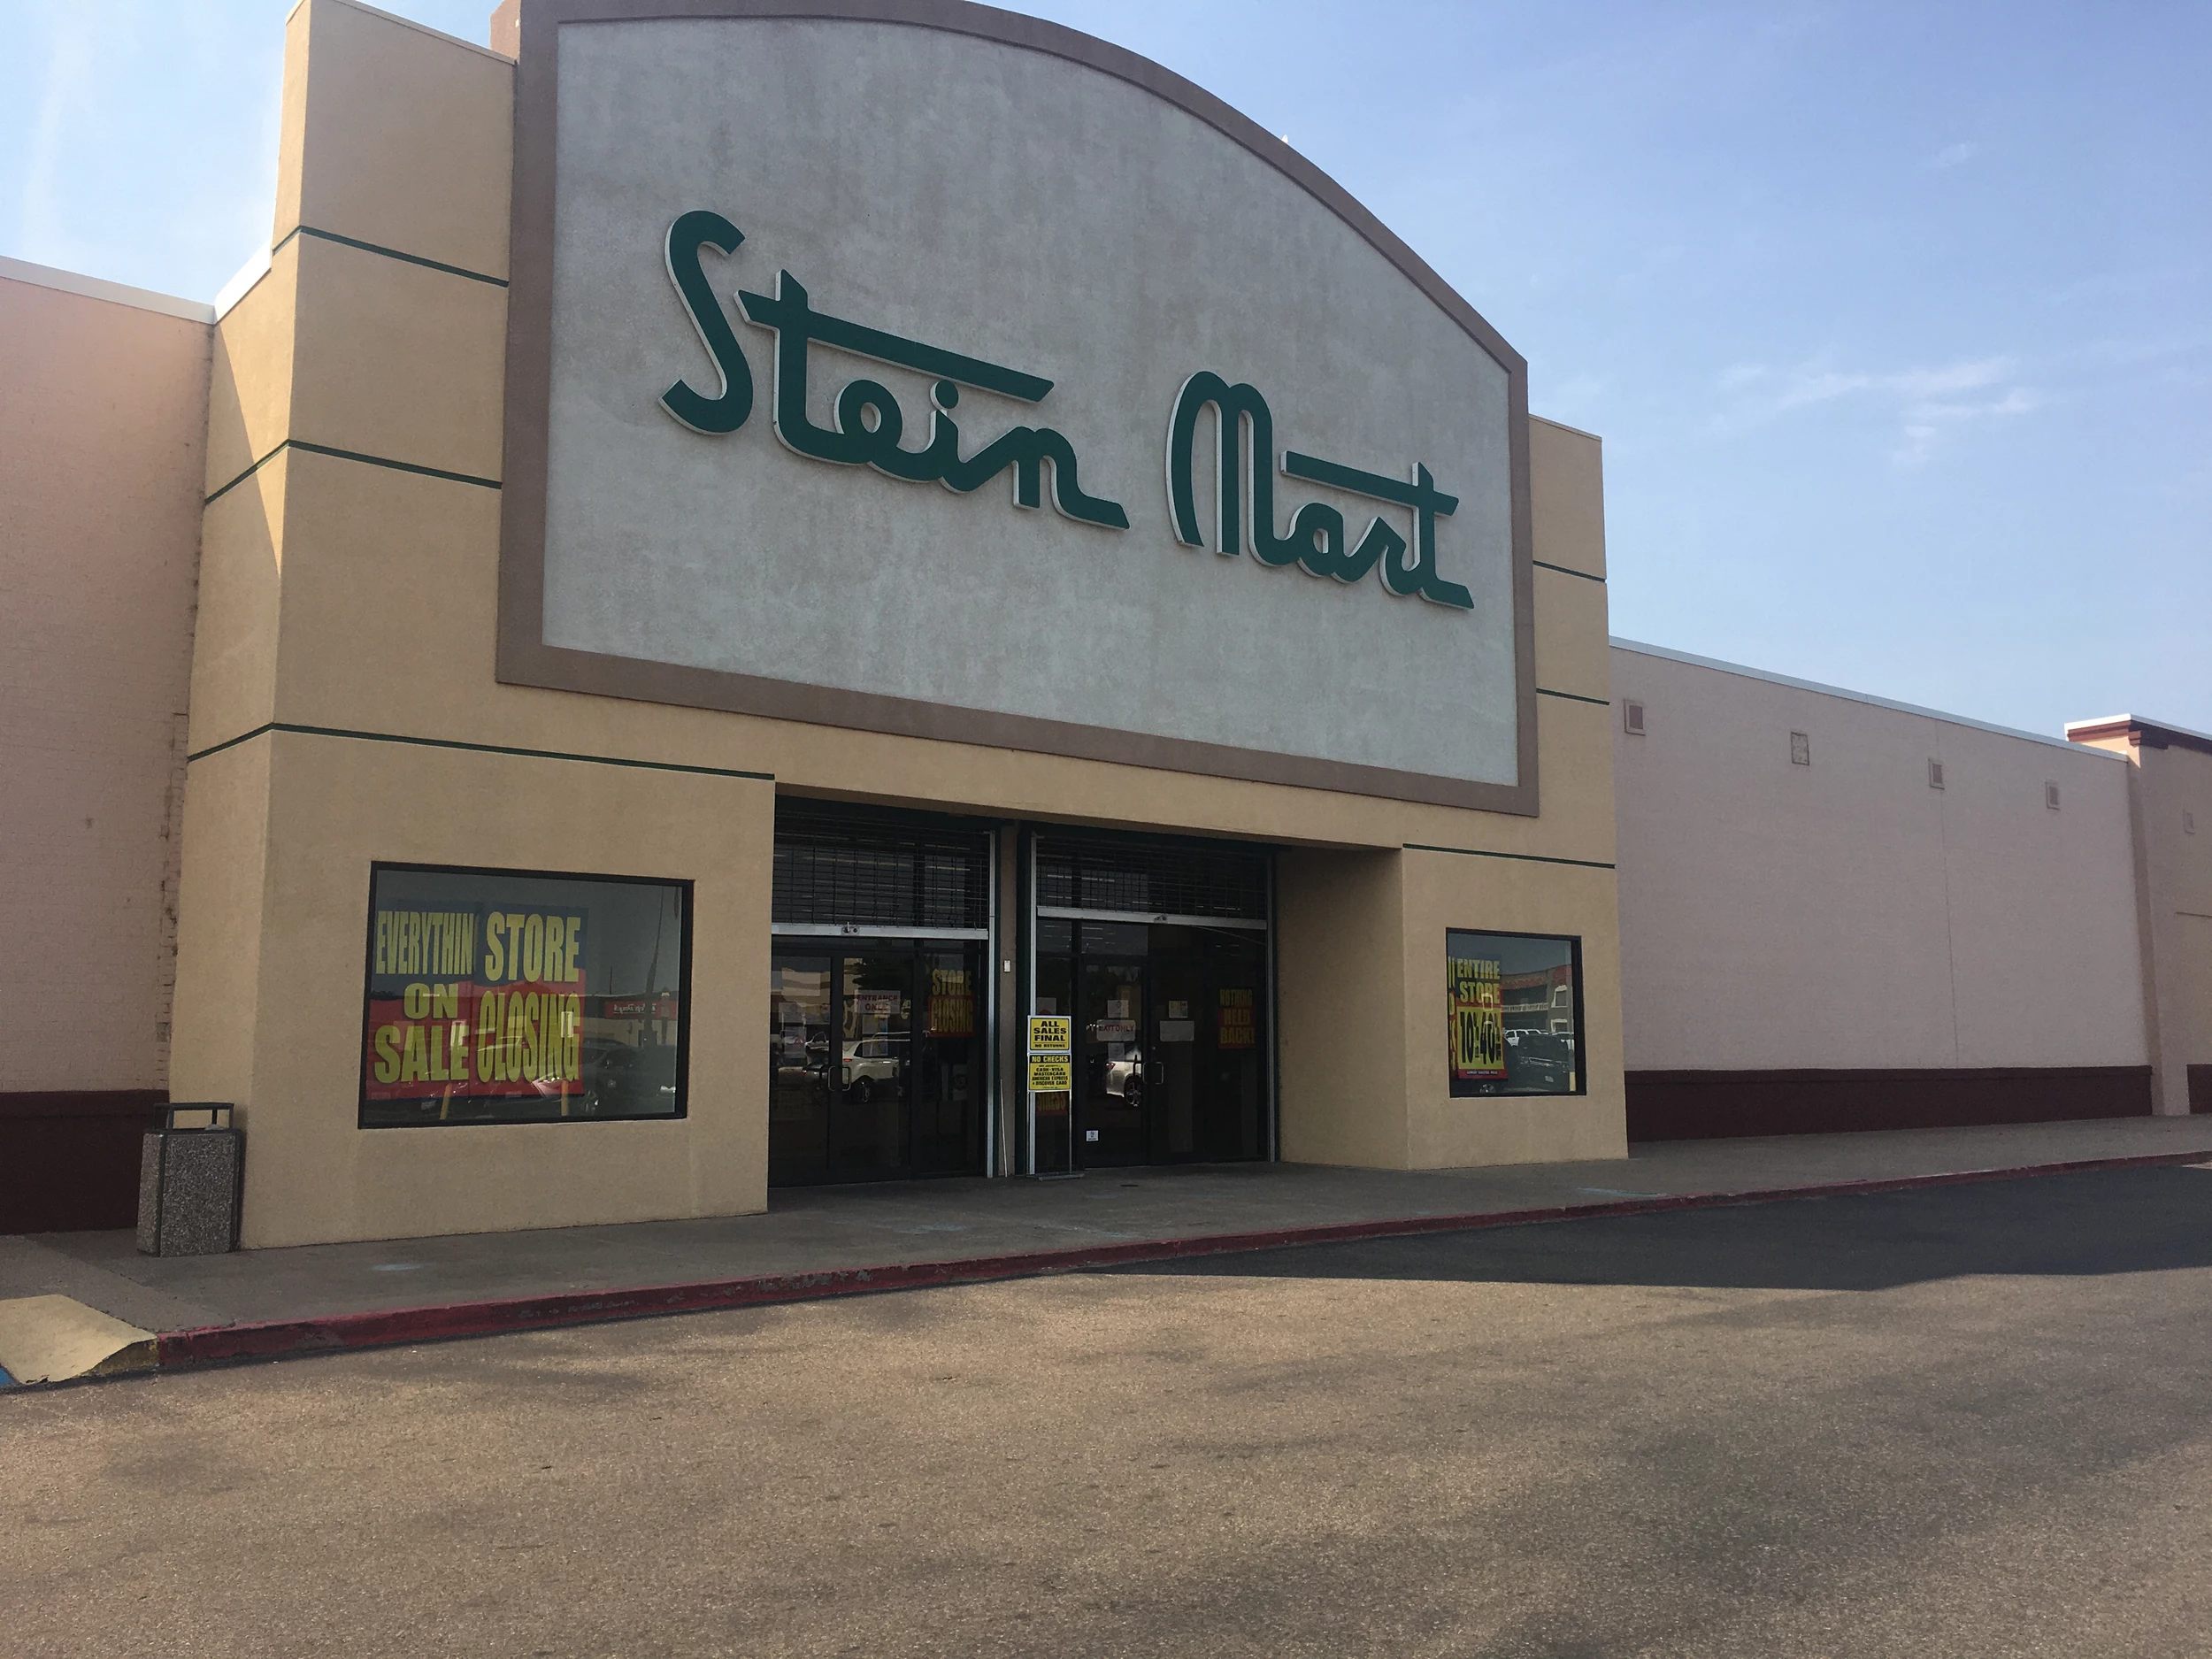 Stein Mart enters bankruptcy; store closures coming